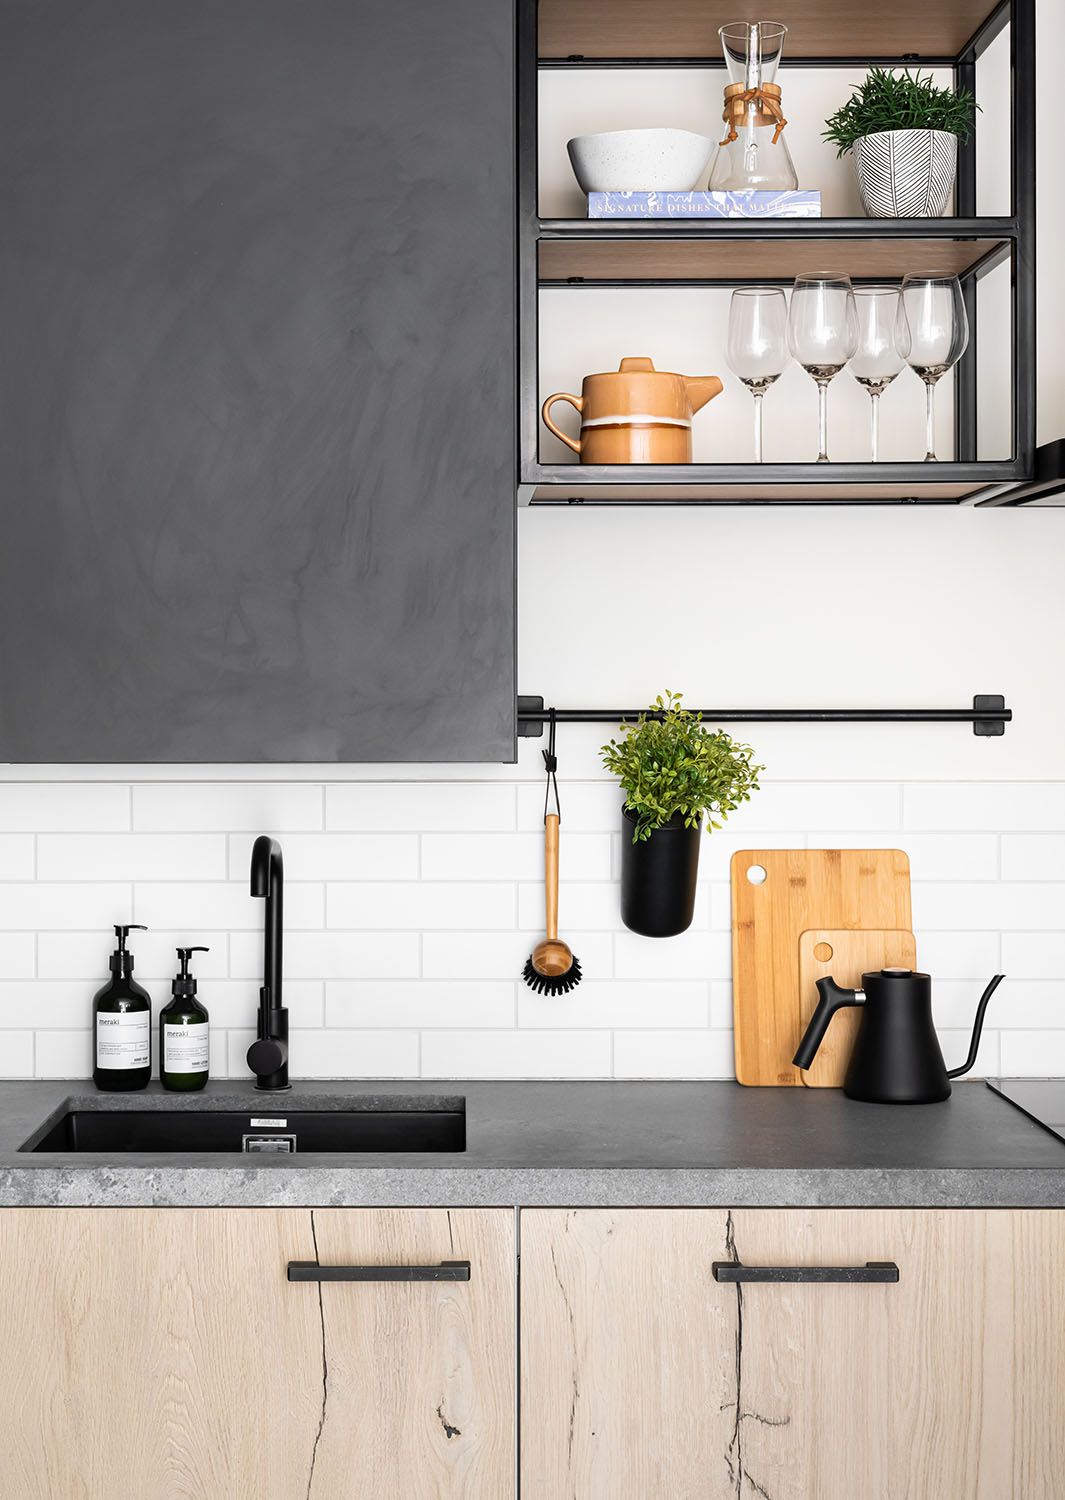 How to overhaul your kitchen - the Easter DIY project you can easily do ...